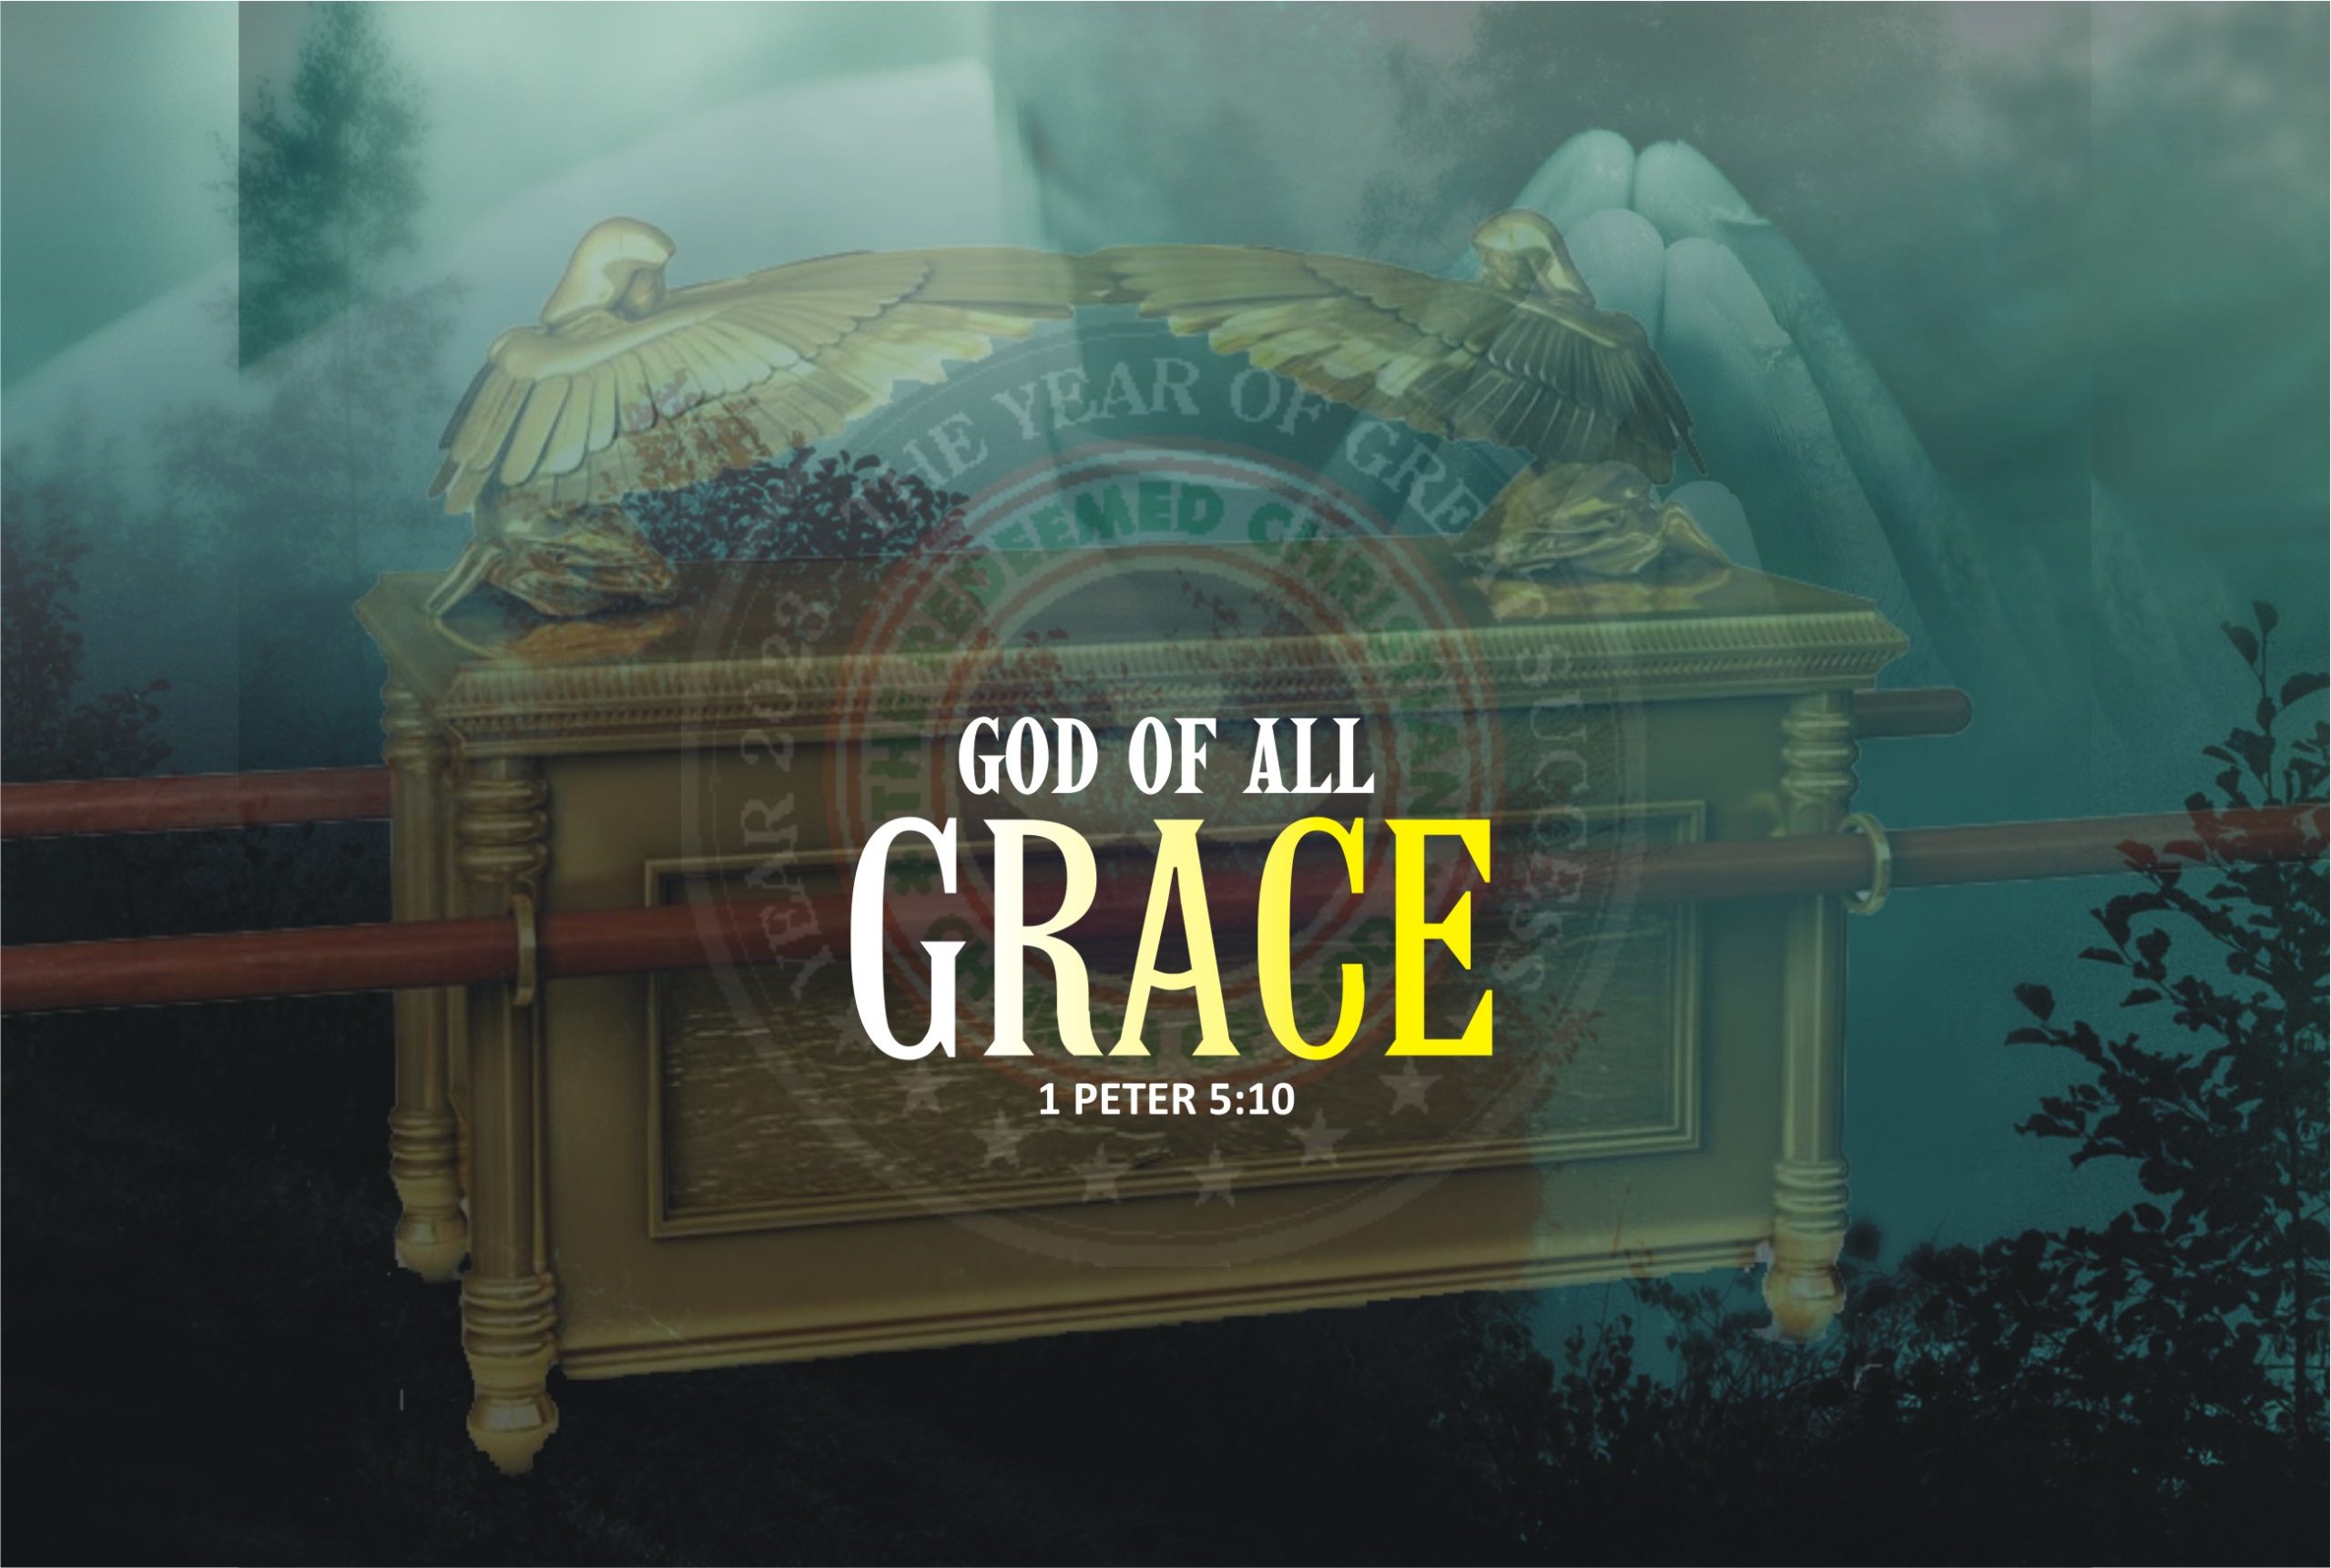 The God of All Grace (1 Peter 5:10 )